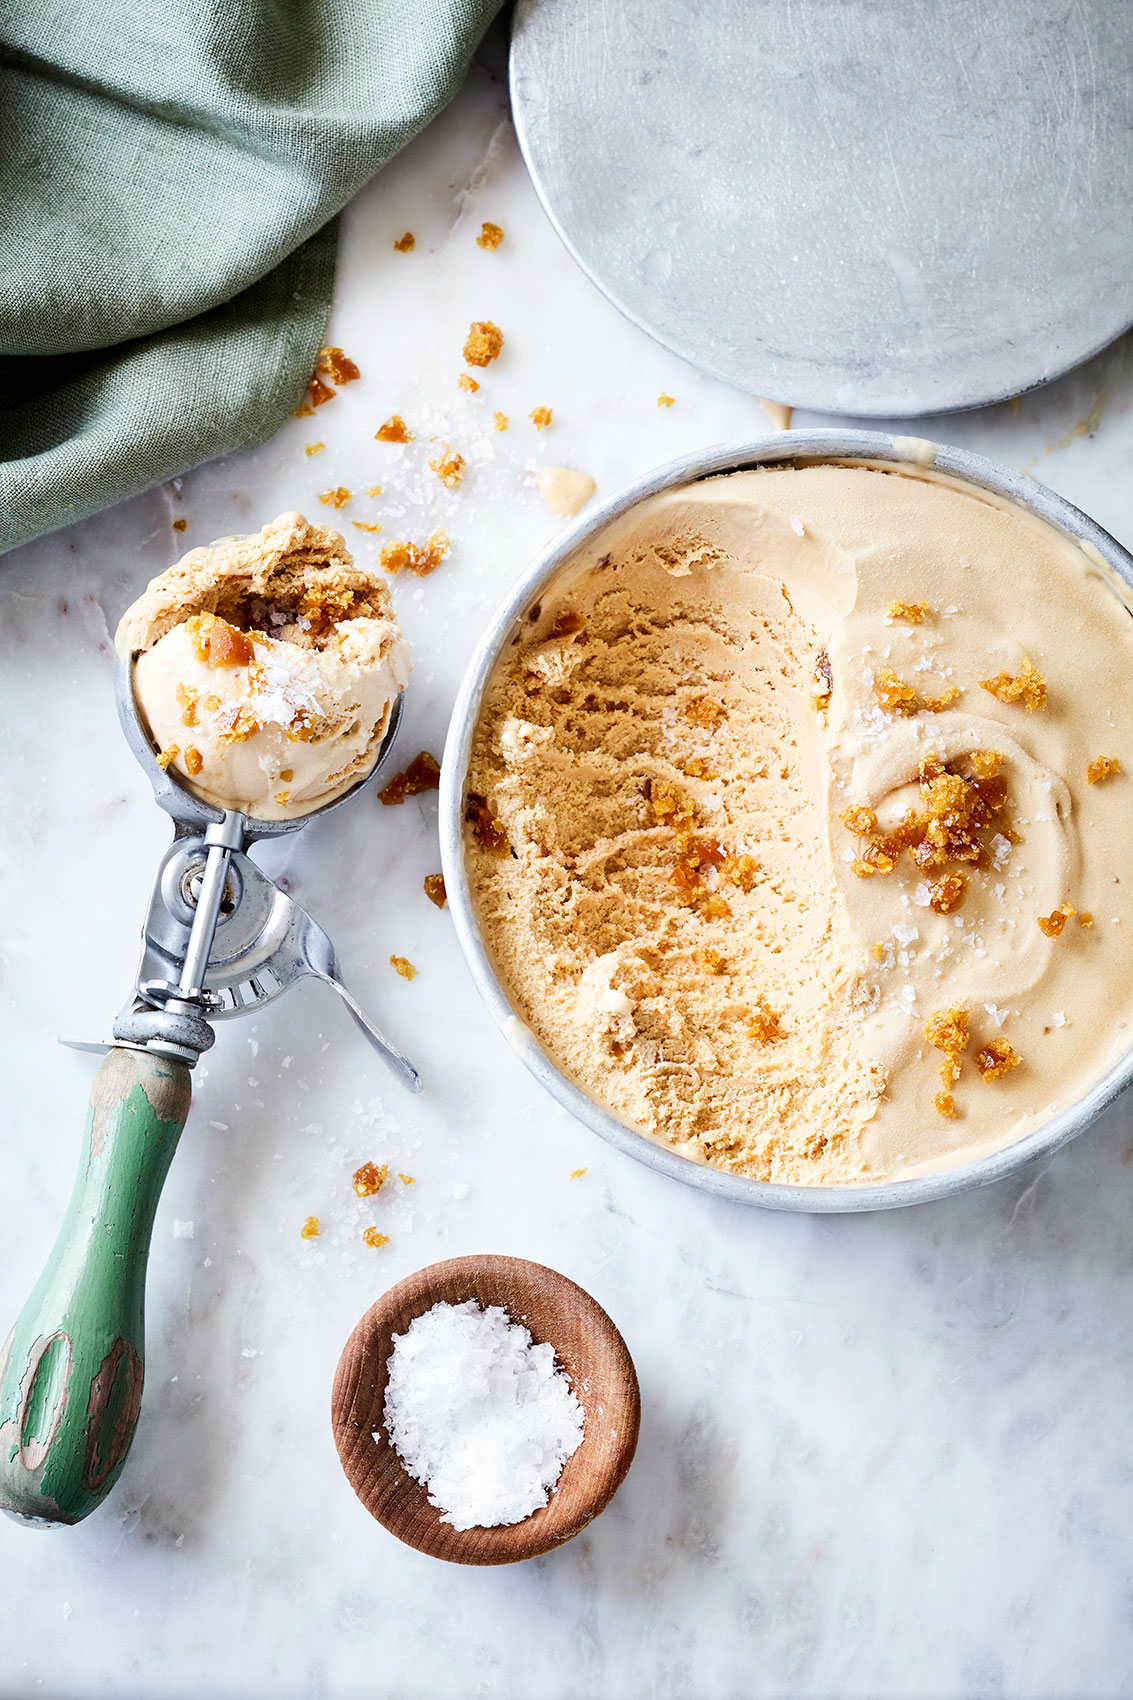 Nord Salted Caramel Ice Cream Scoop • Advertising & Editorial Food Photography